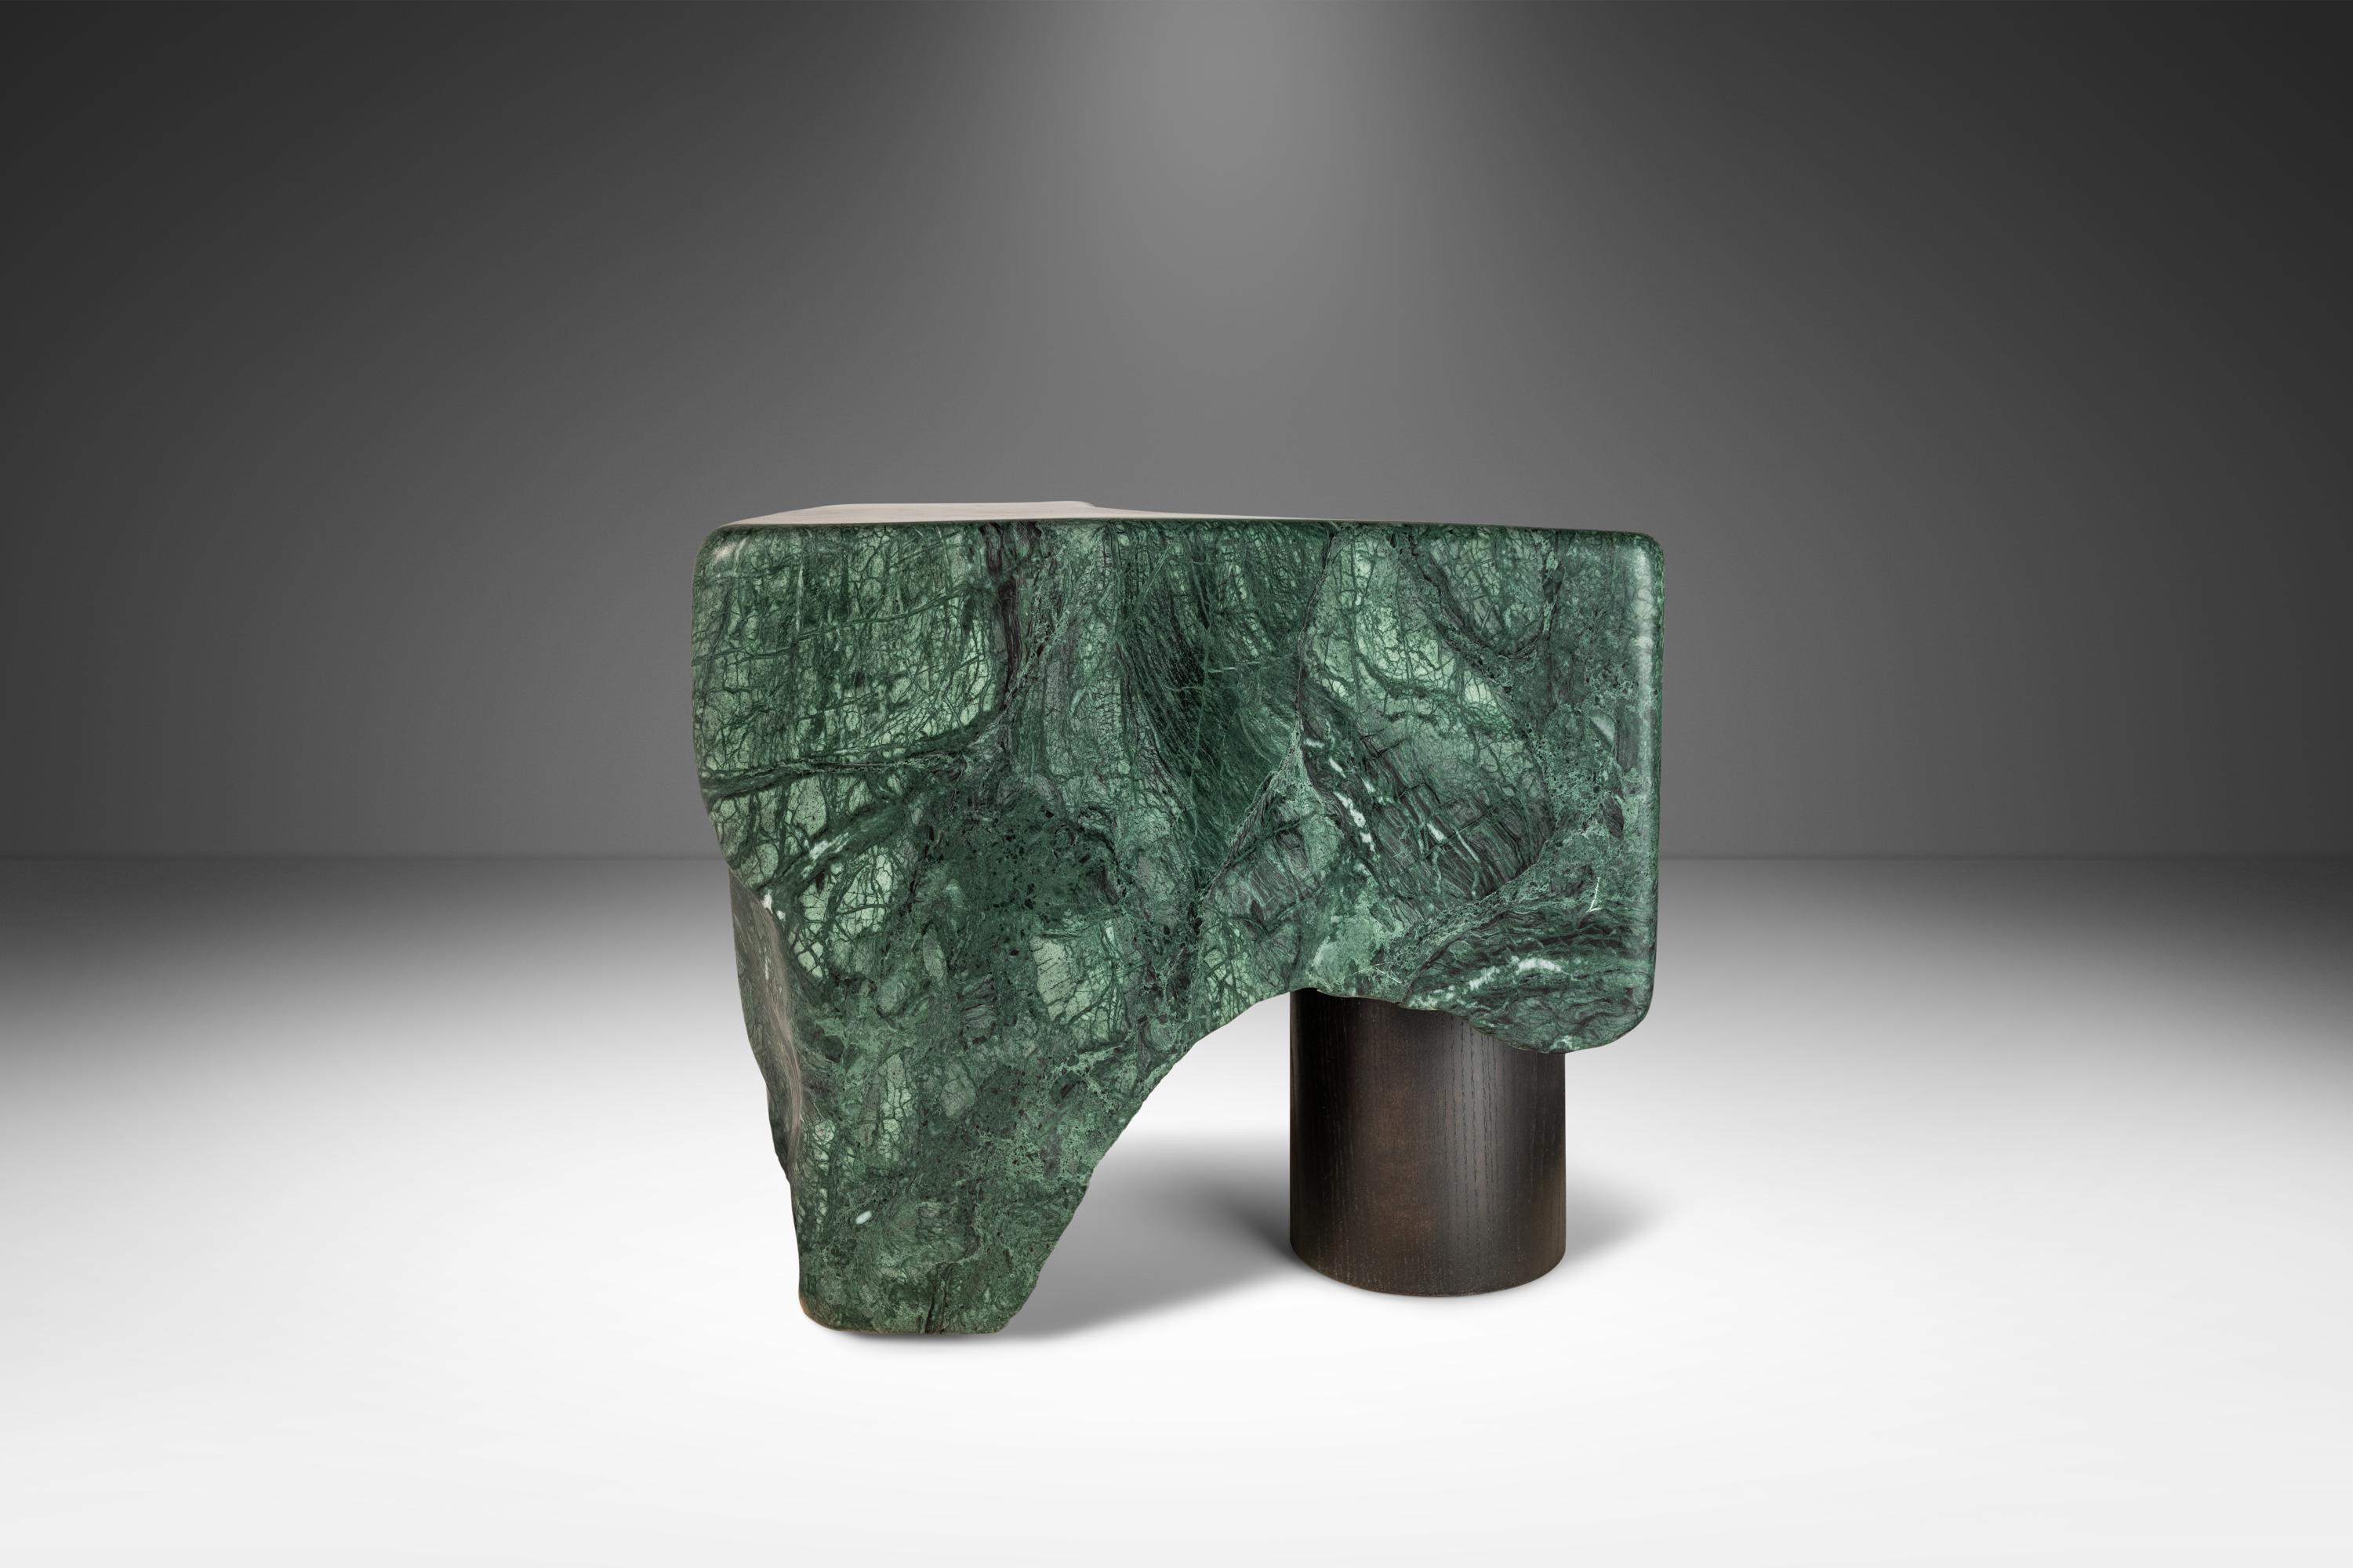 Contemporary Green Marble Abstract Organic Modern Sculpture by Mark Leblanc, USA, 2000's For Sale